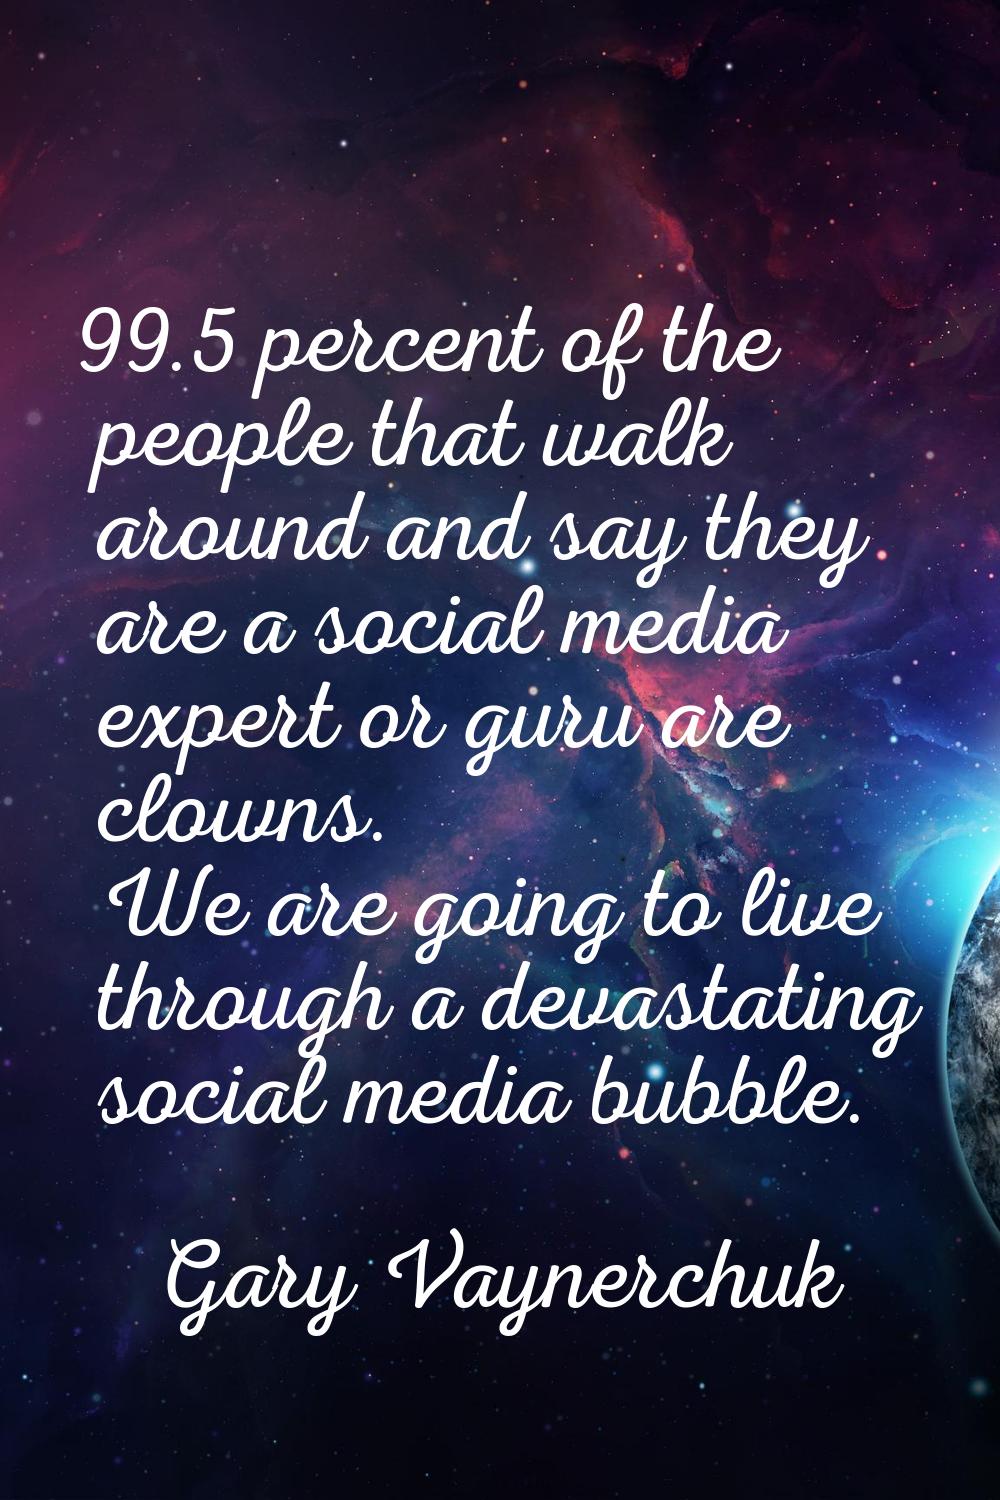 99.5 percent of the people that walk around and say they are a social media expert or guru are clow